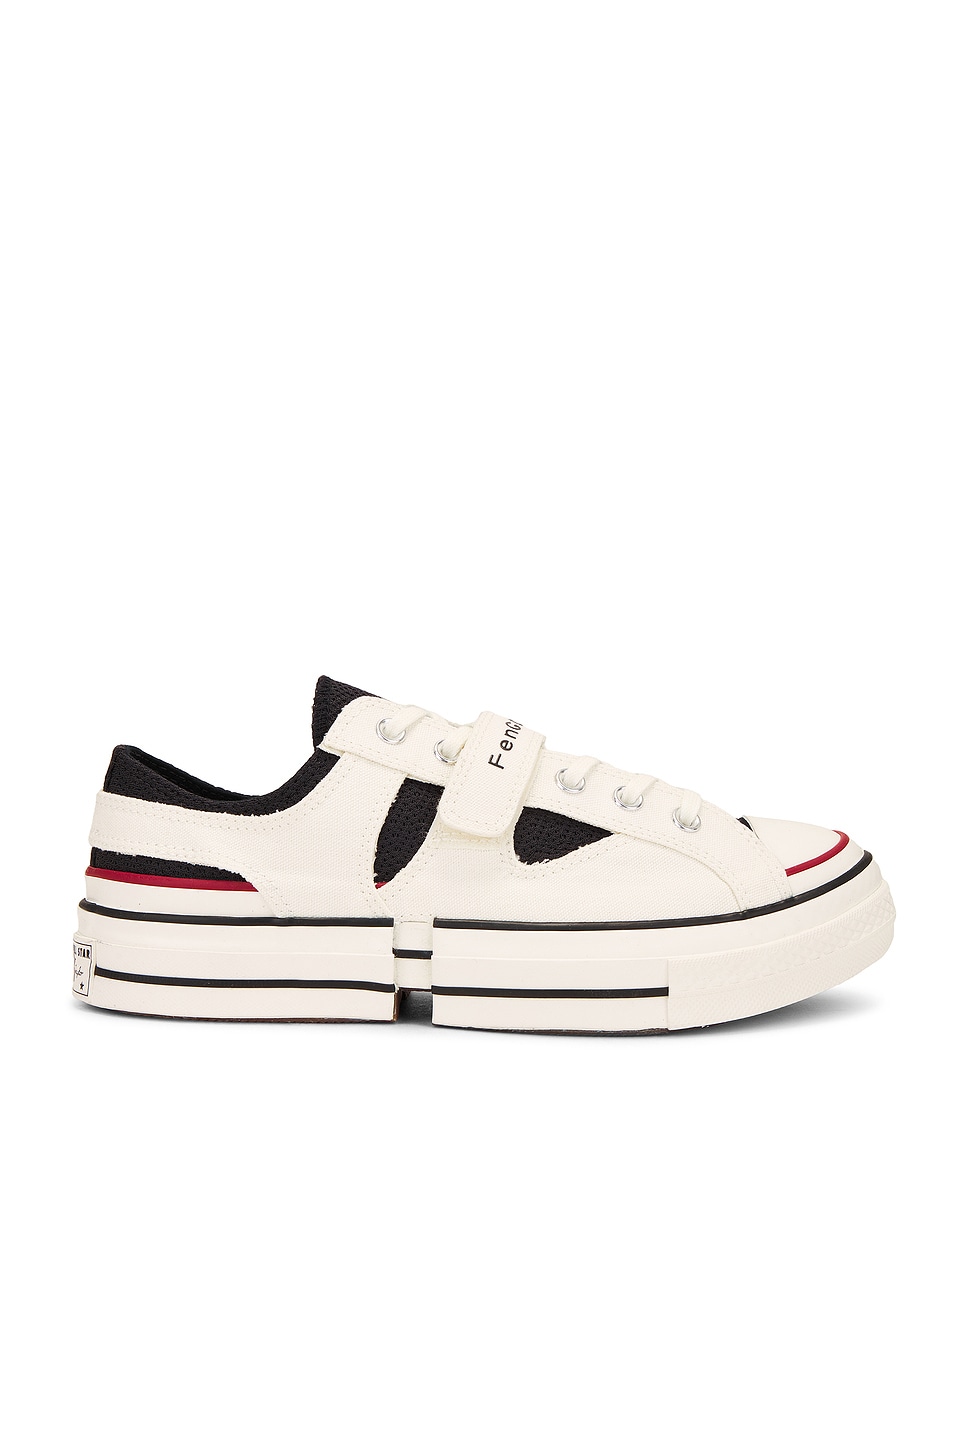 Image 1 of Converse x Feng Chen Wang Ct70 2 In 1 Ox in Egret & Black